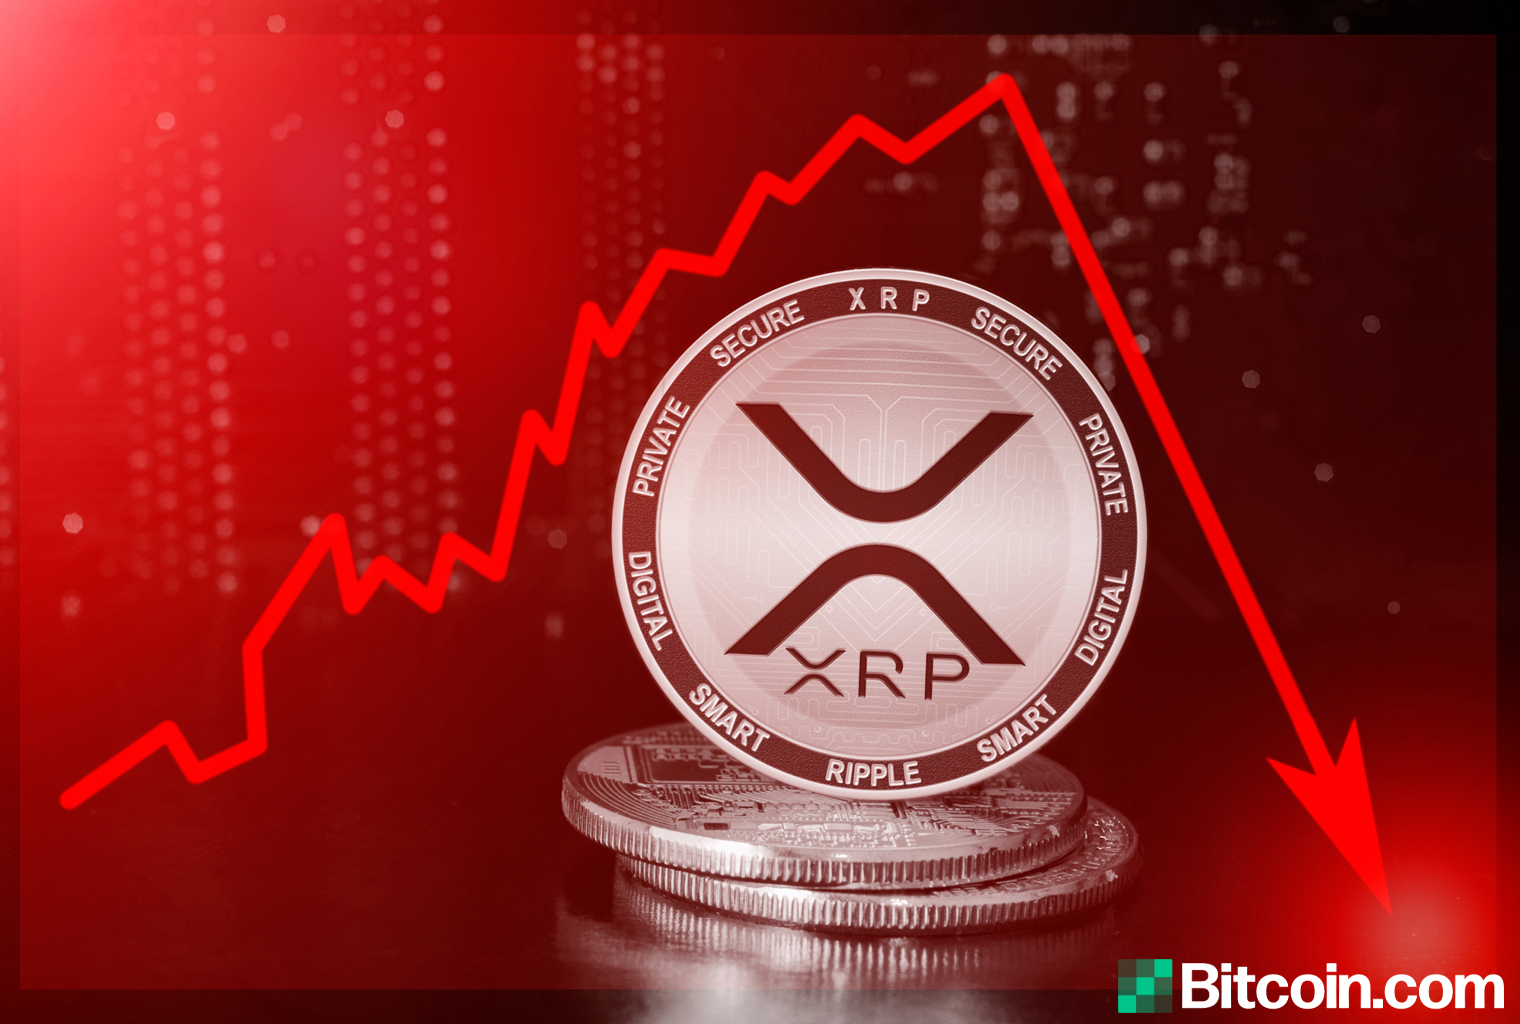 XRP Price Brought Down 56% in One Candle, Bitmex Traders Outraged Over Flash Crash